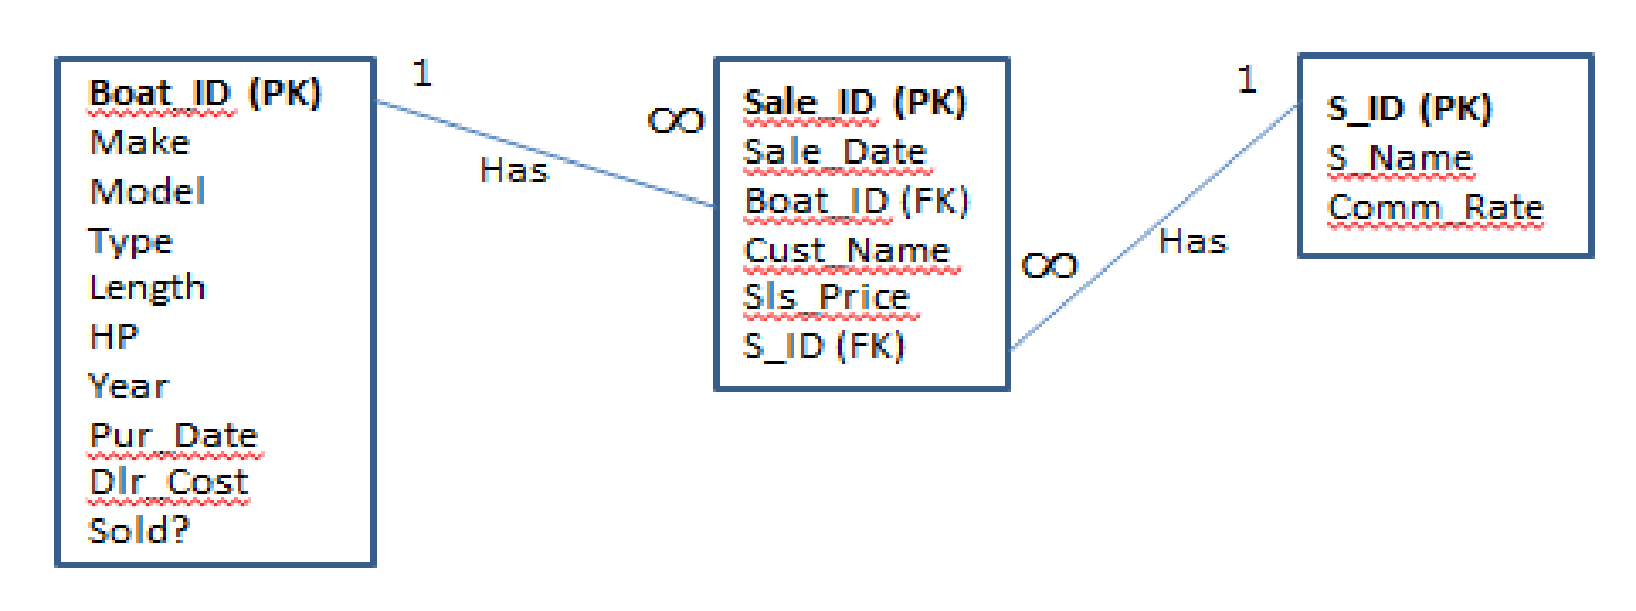 Entity relationship diagram for the database